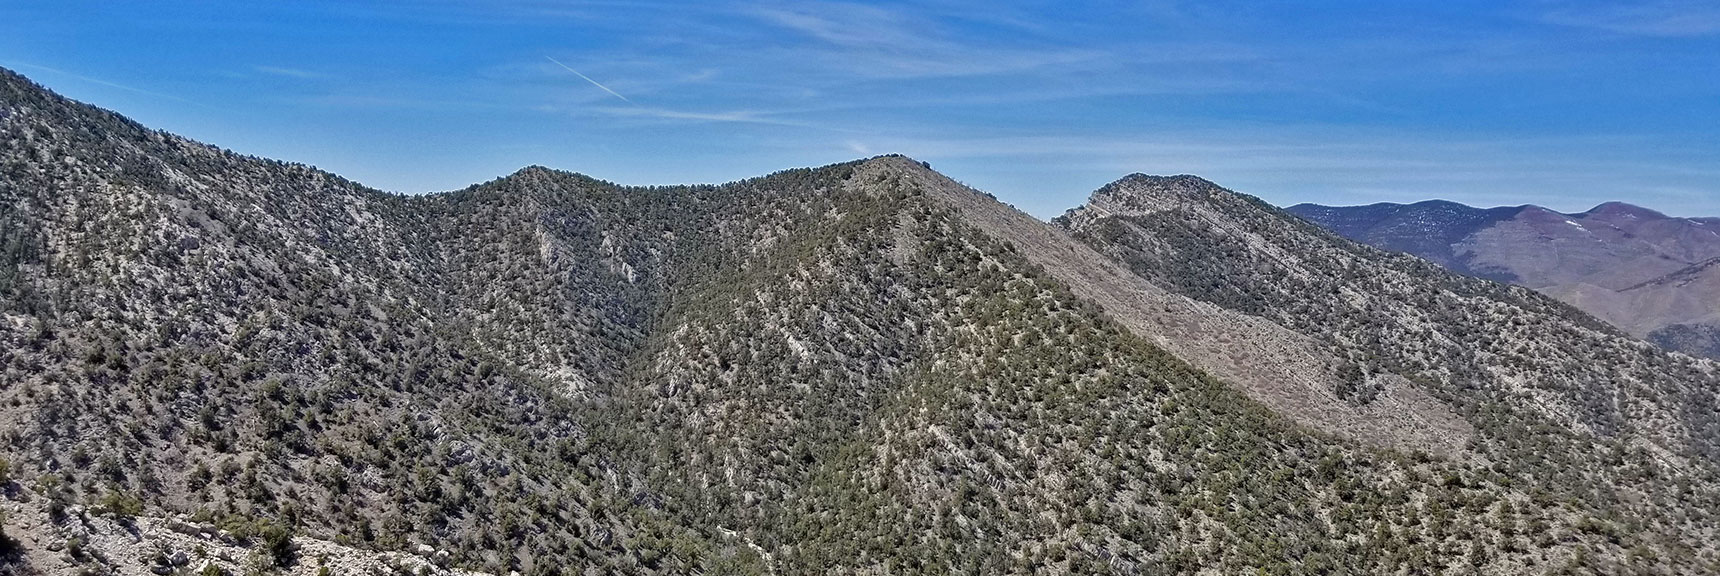 Keystone Thrust Looking West Viewed from the 7400ft High Point on the La Madre Mountain Nevada Northern Approach